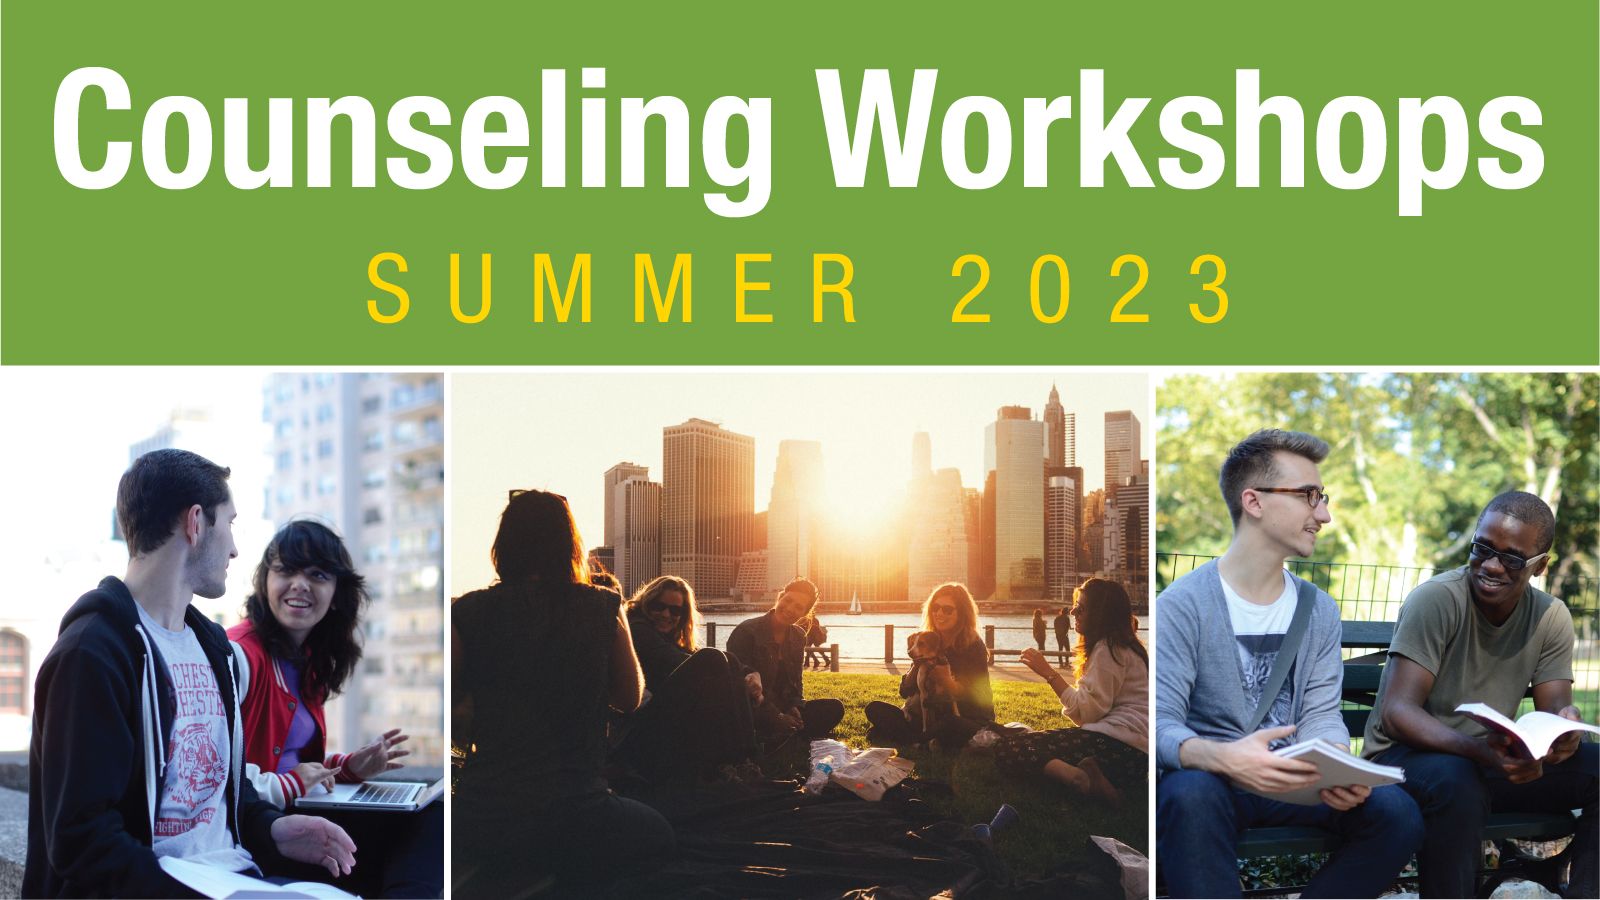 Image for Counseling Workshops, Summer 2023, showing students talking.